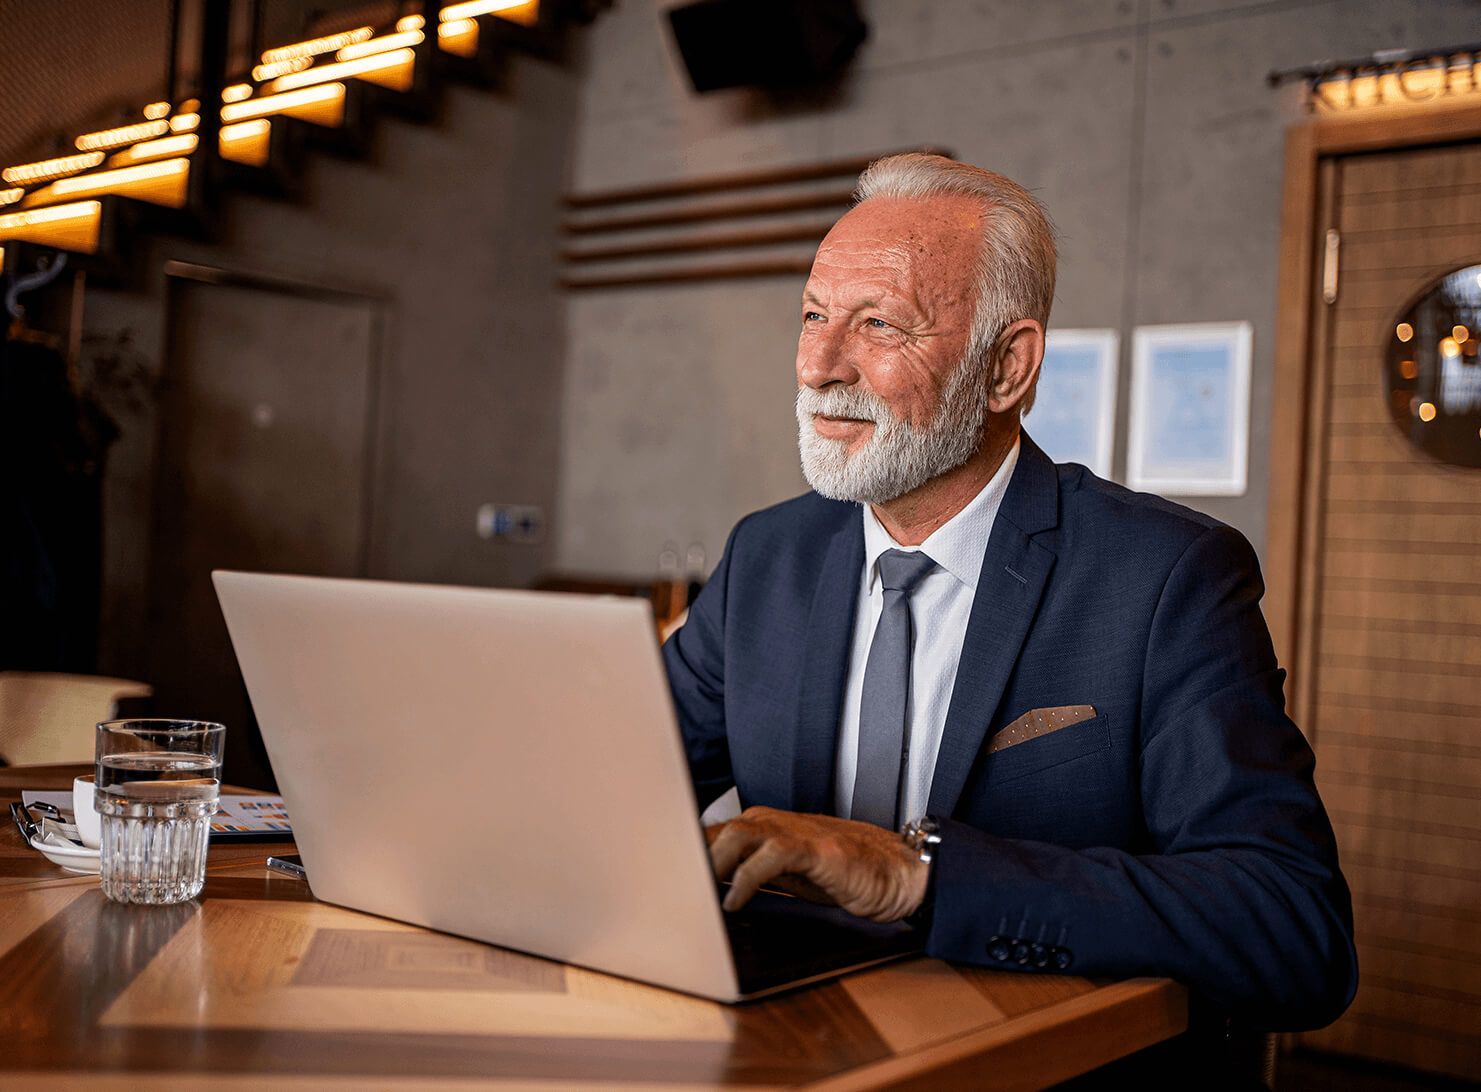 Man in suit working on computer